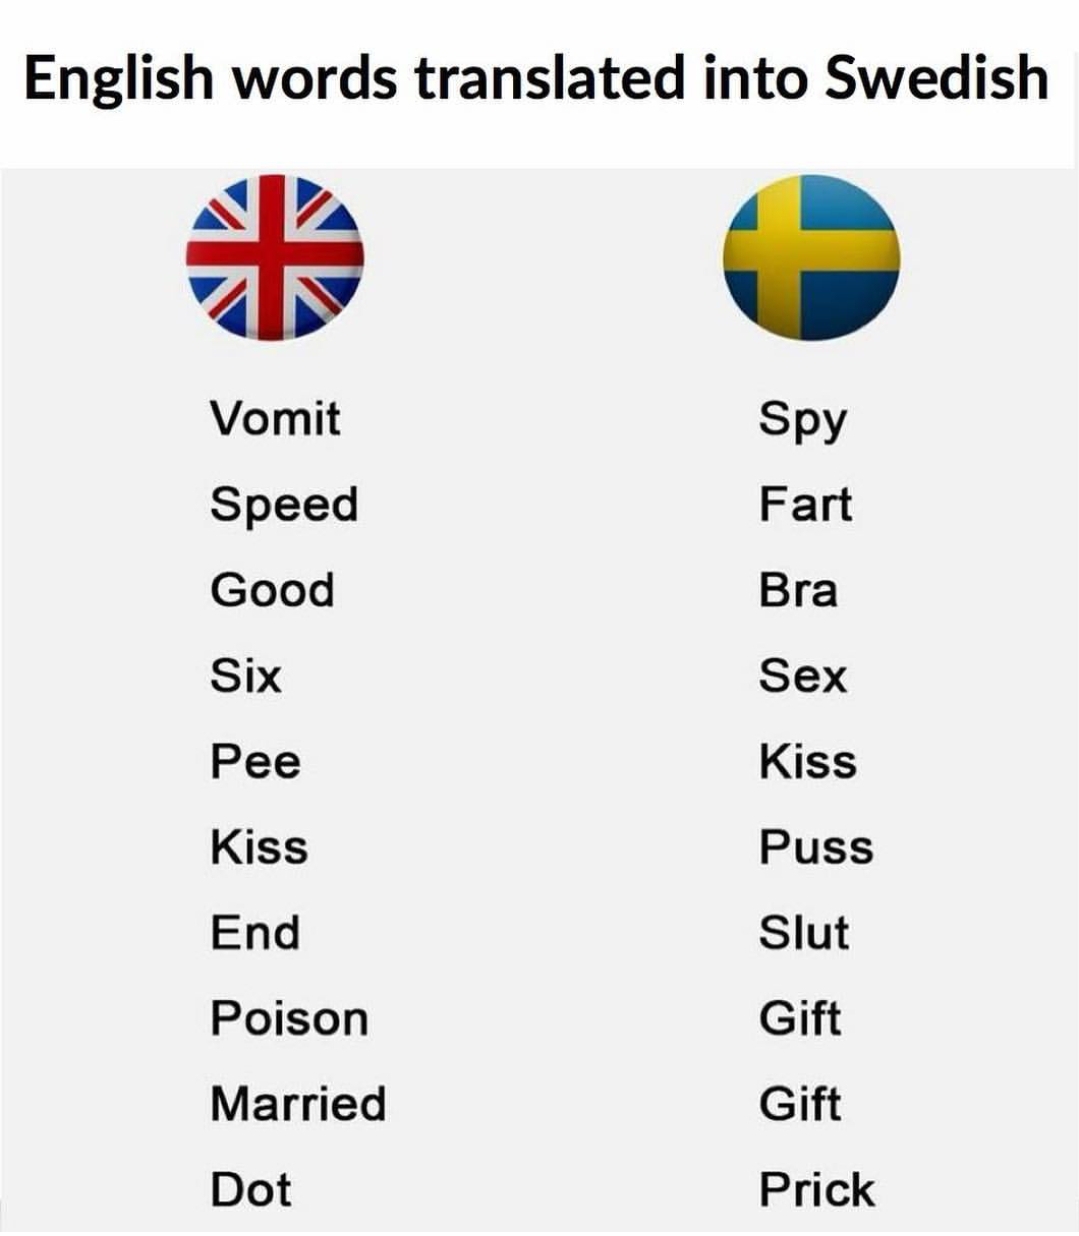 https://www.reddit.com/r/europe/comments/9ixyve/beauties_of_learning_swedish/